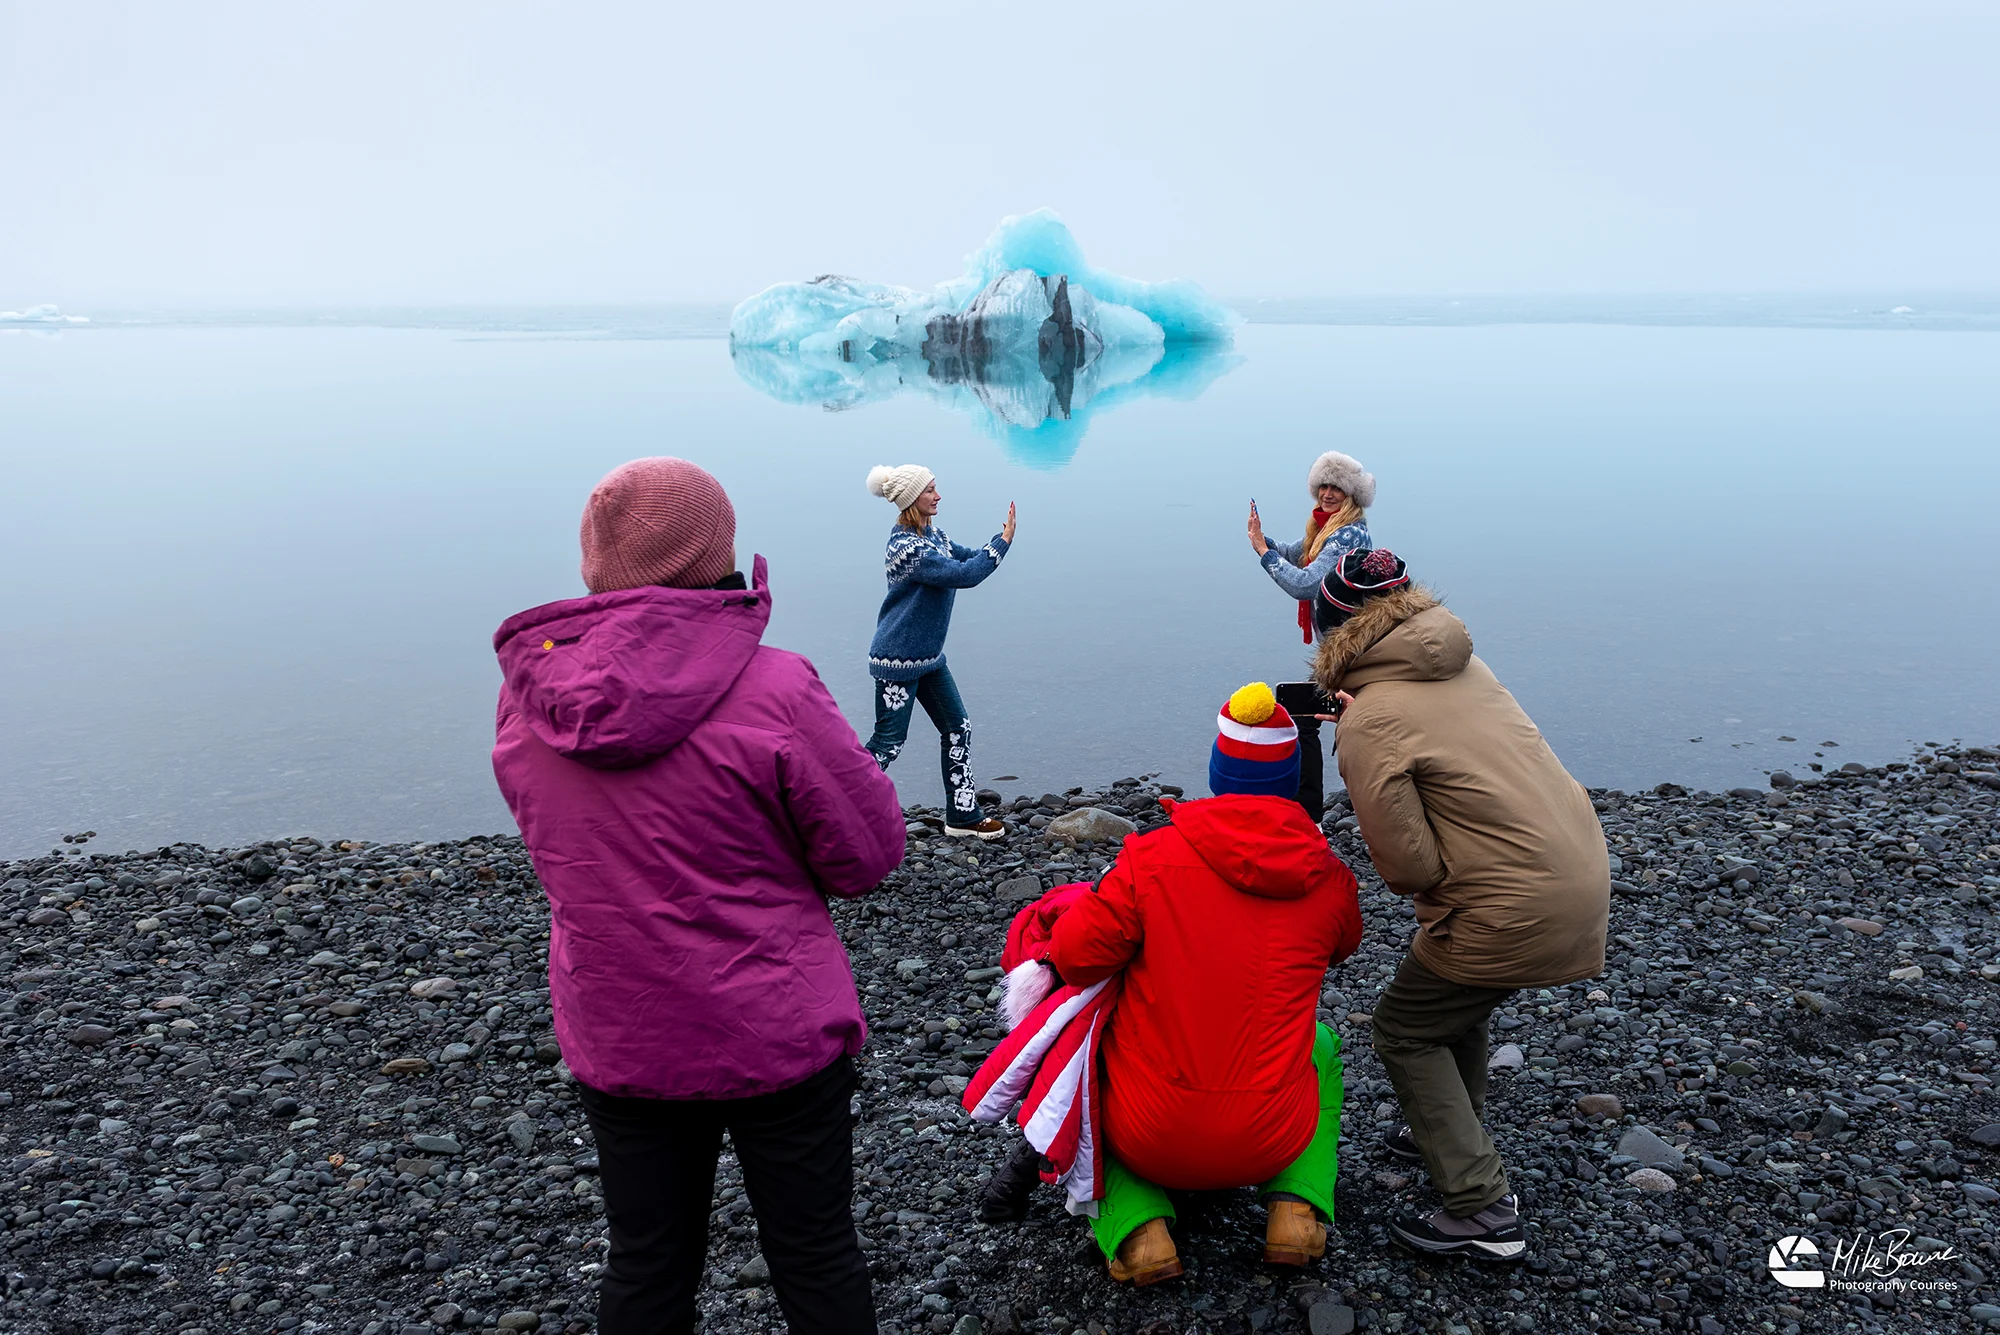 Tourists at Jökulsárlón Iceland pretend to hold a giant iceberg for a photo